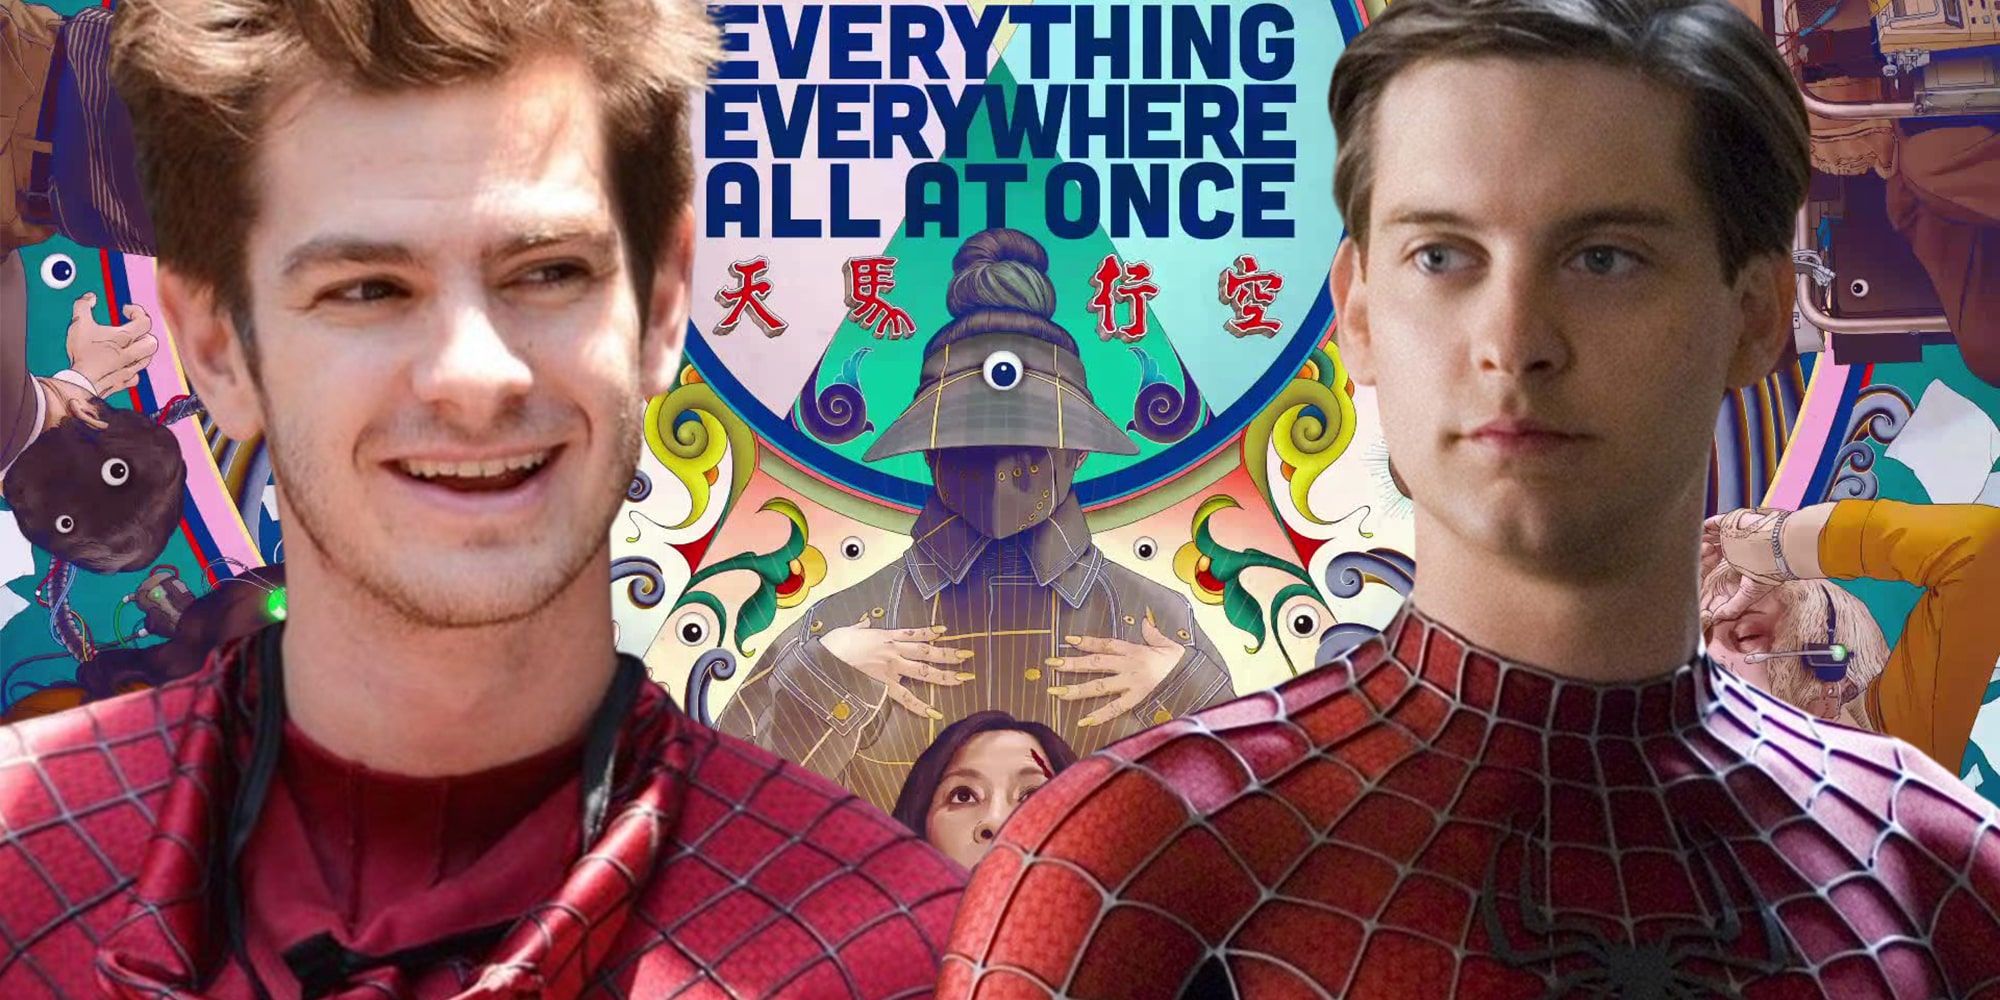 Andrew Garfield and Tobey Maguire in Everything Everywhere All At Once Poster